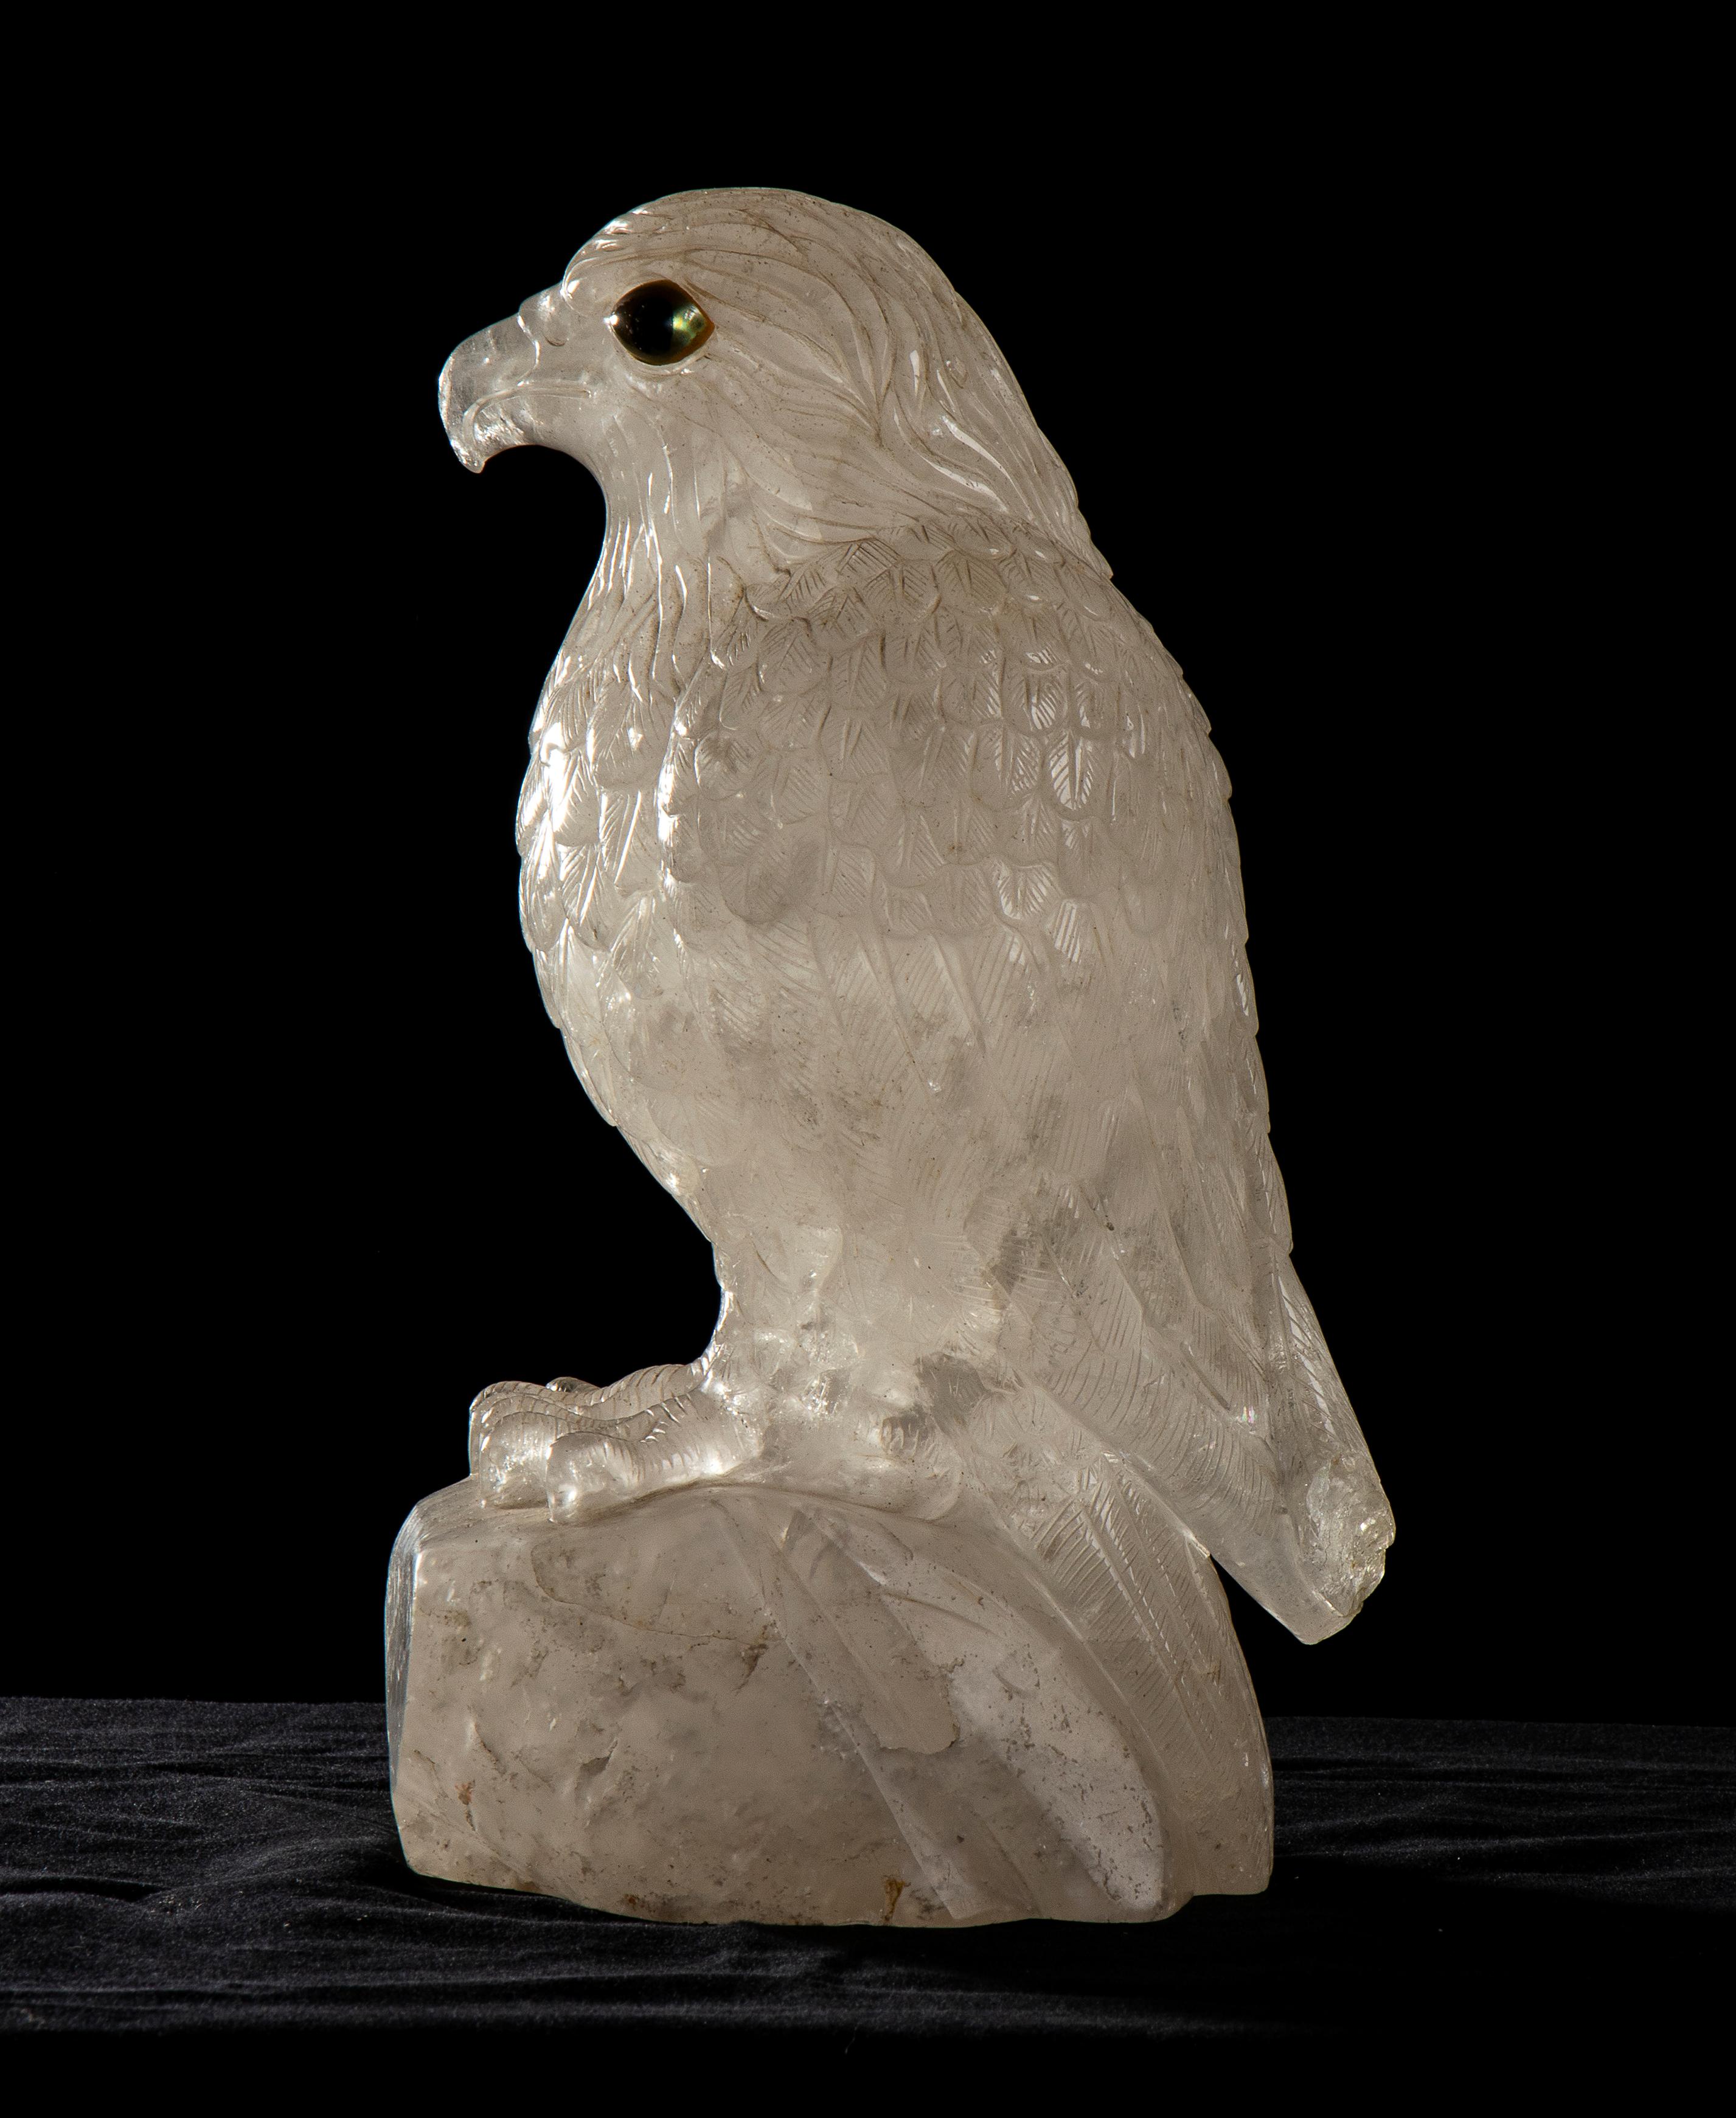 An impressive and unique sculpture of Eagle carved by a rare block of the beautiful Rock Crystal, called also Quartz or white Quartz. This stone is so much beautiful and precious that is used in the most expensive and luxury artworks and decorative